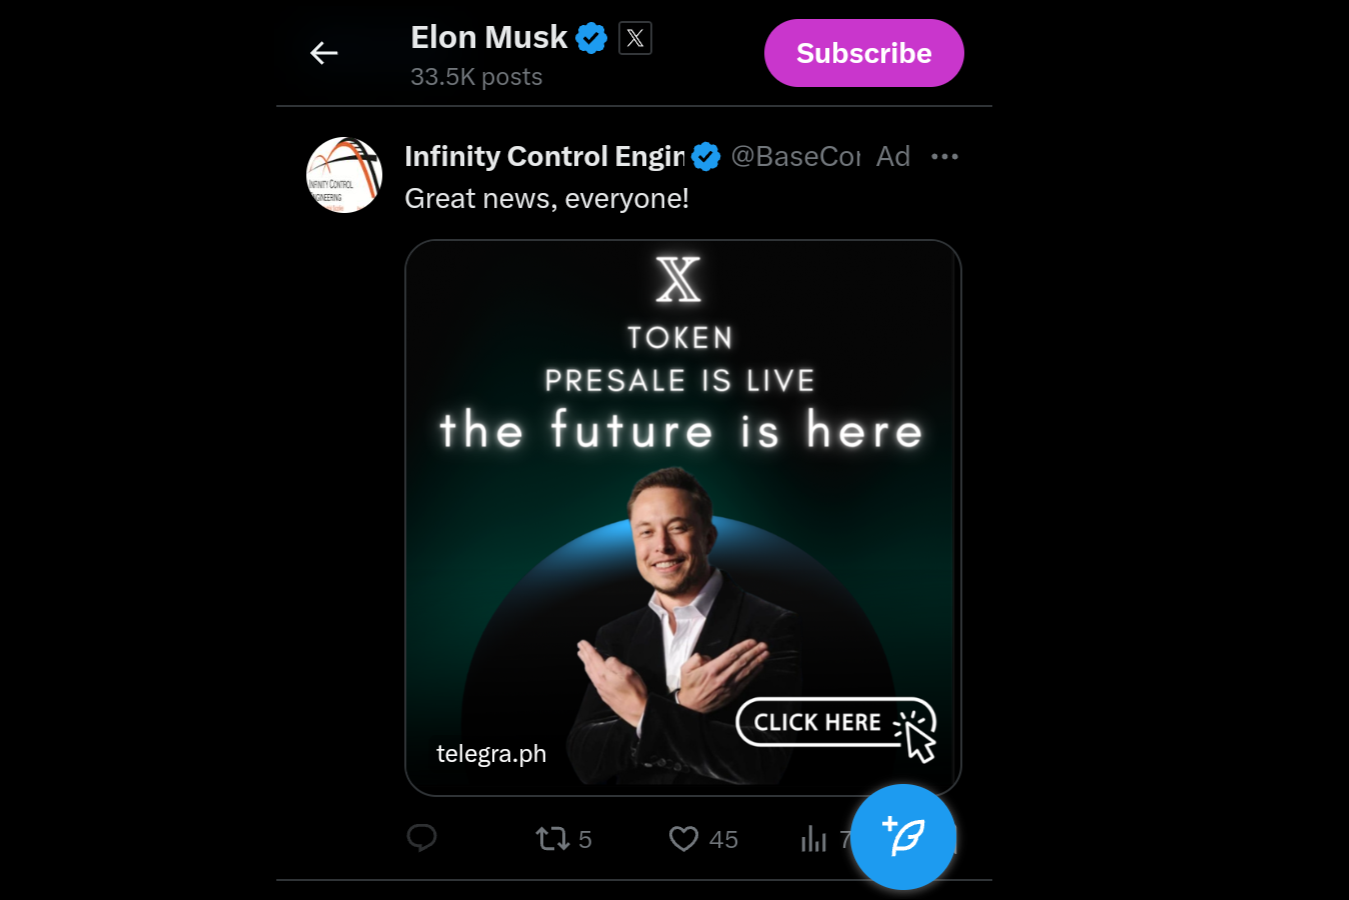 Elon Musk’s profile page on X has featured ads for fake cryptocurrency